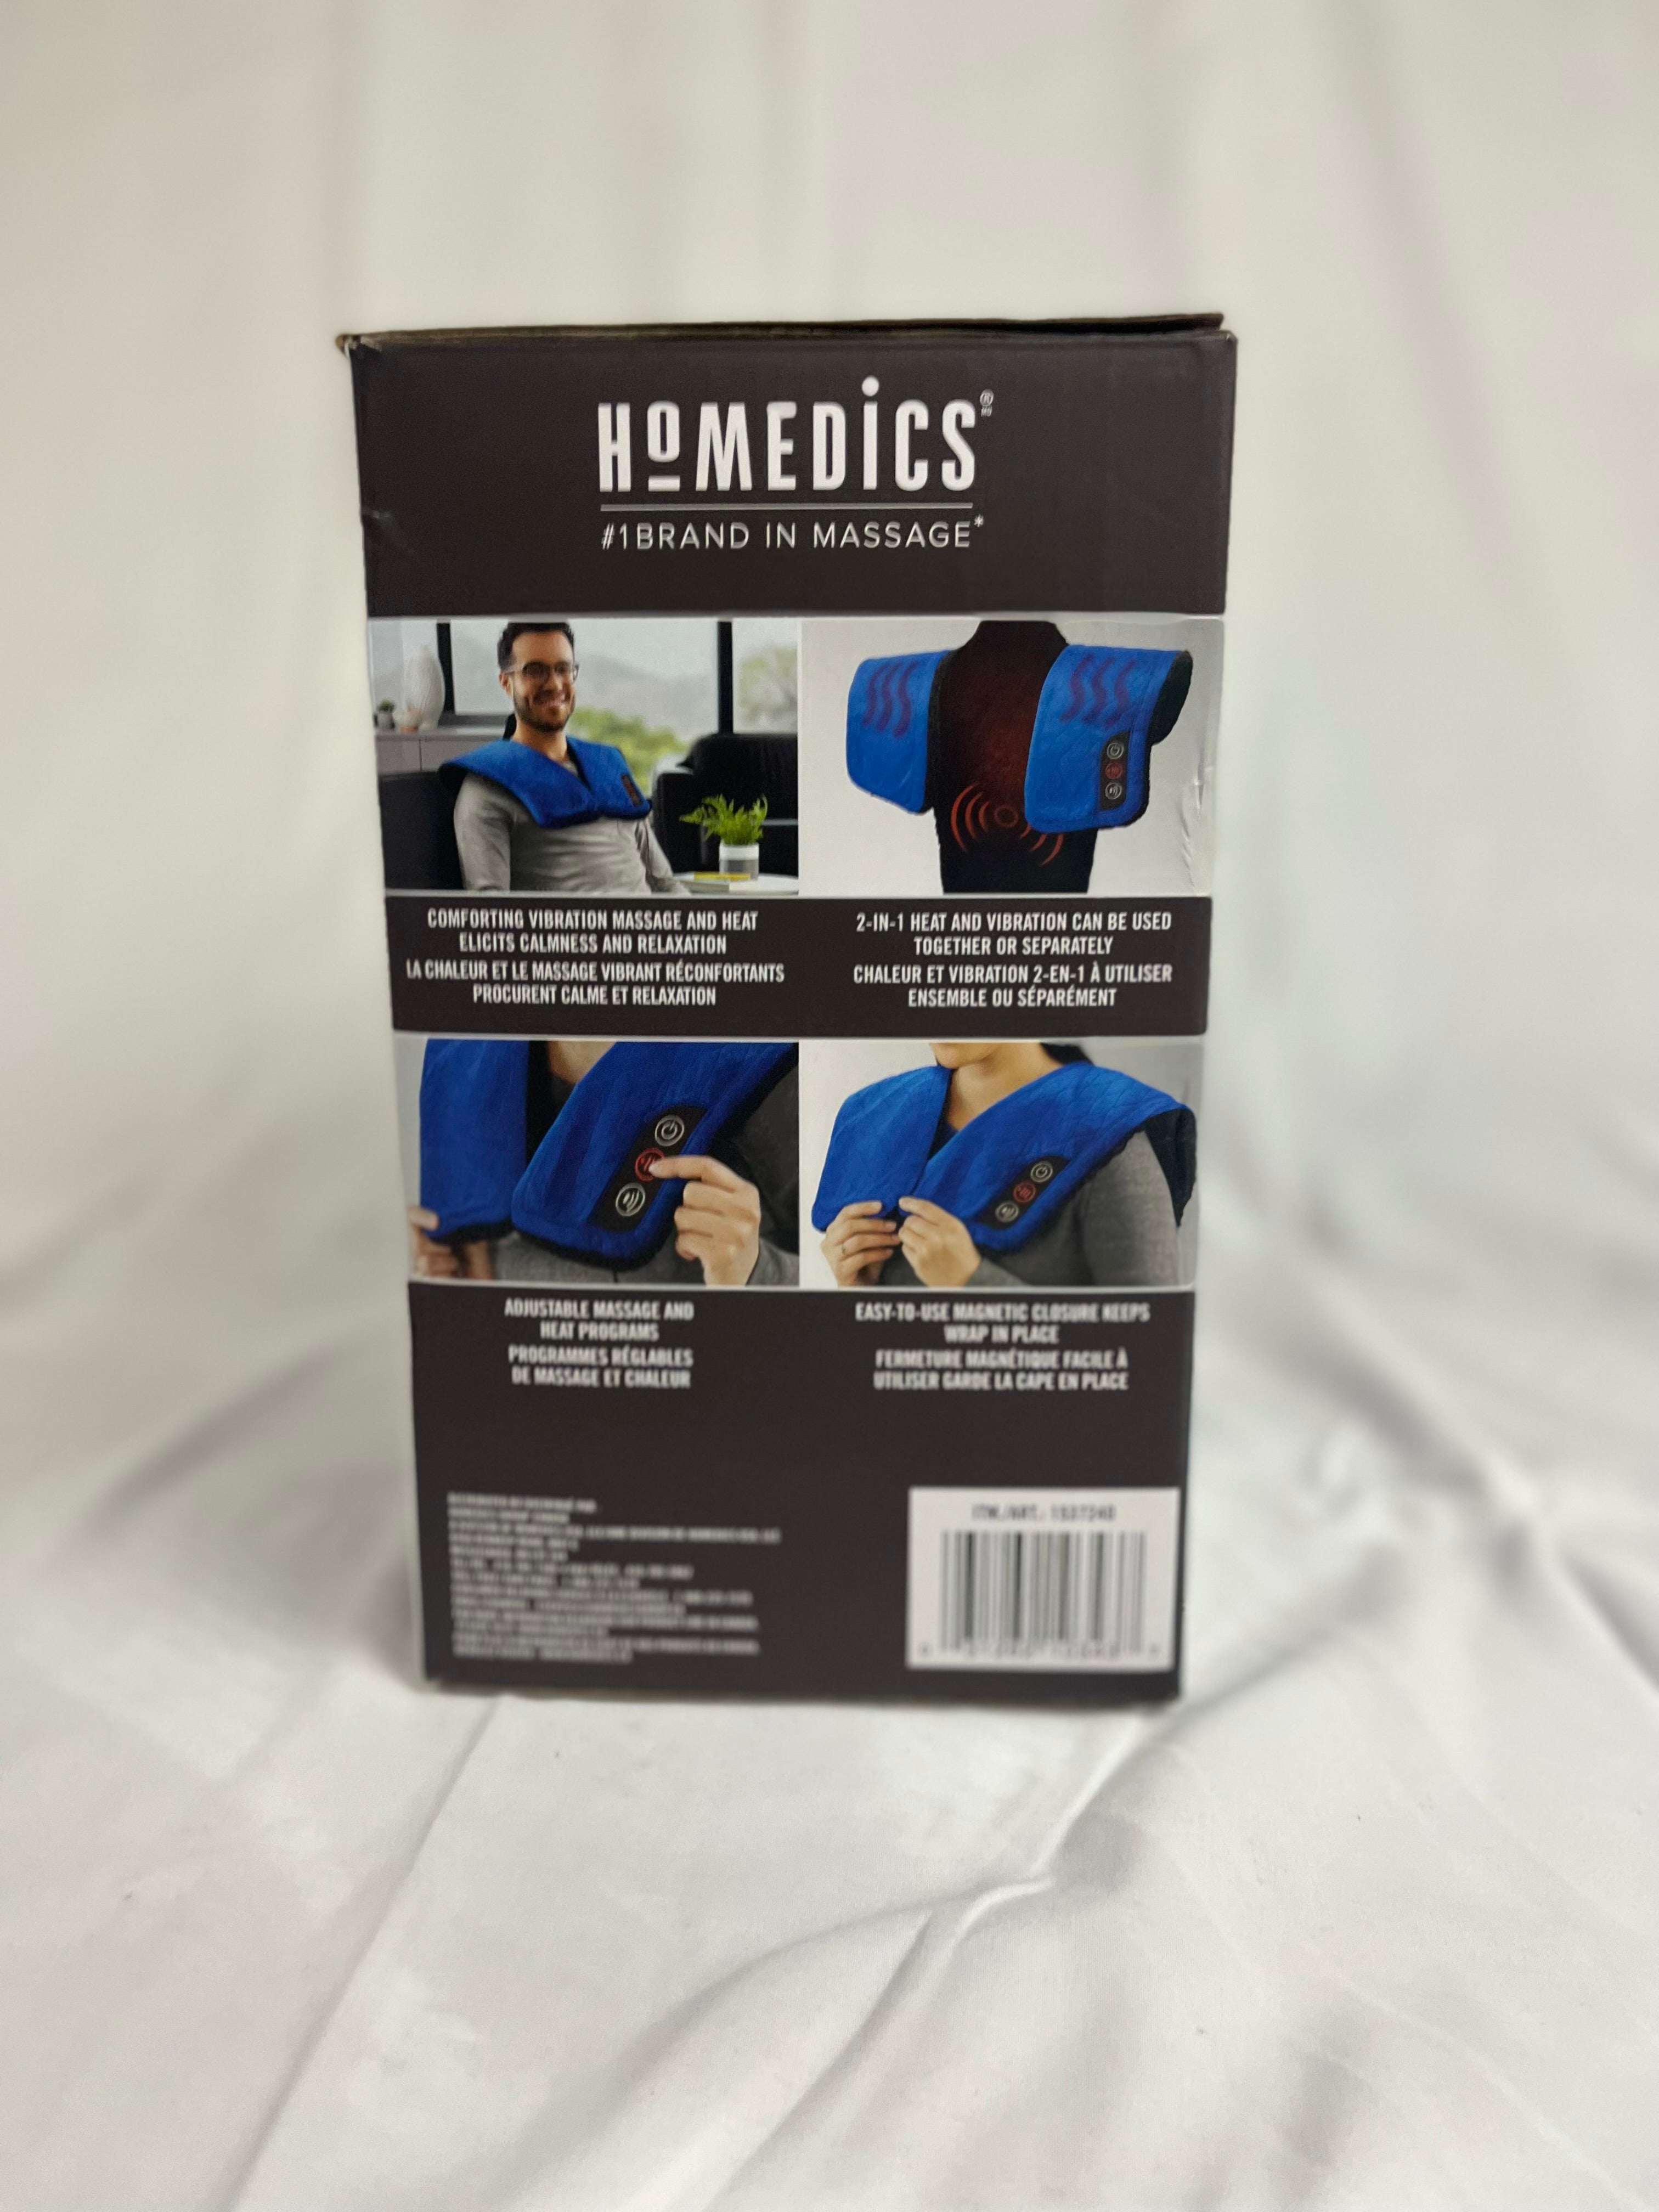 HOMEDICS WEIGHTED WRAP